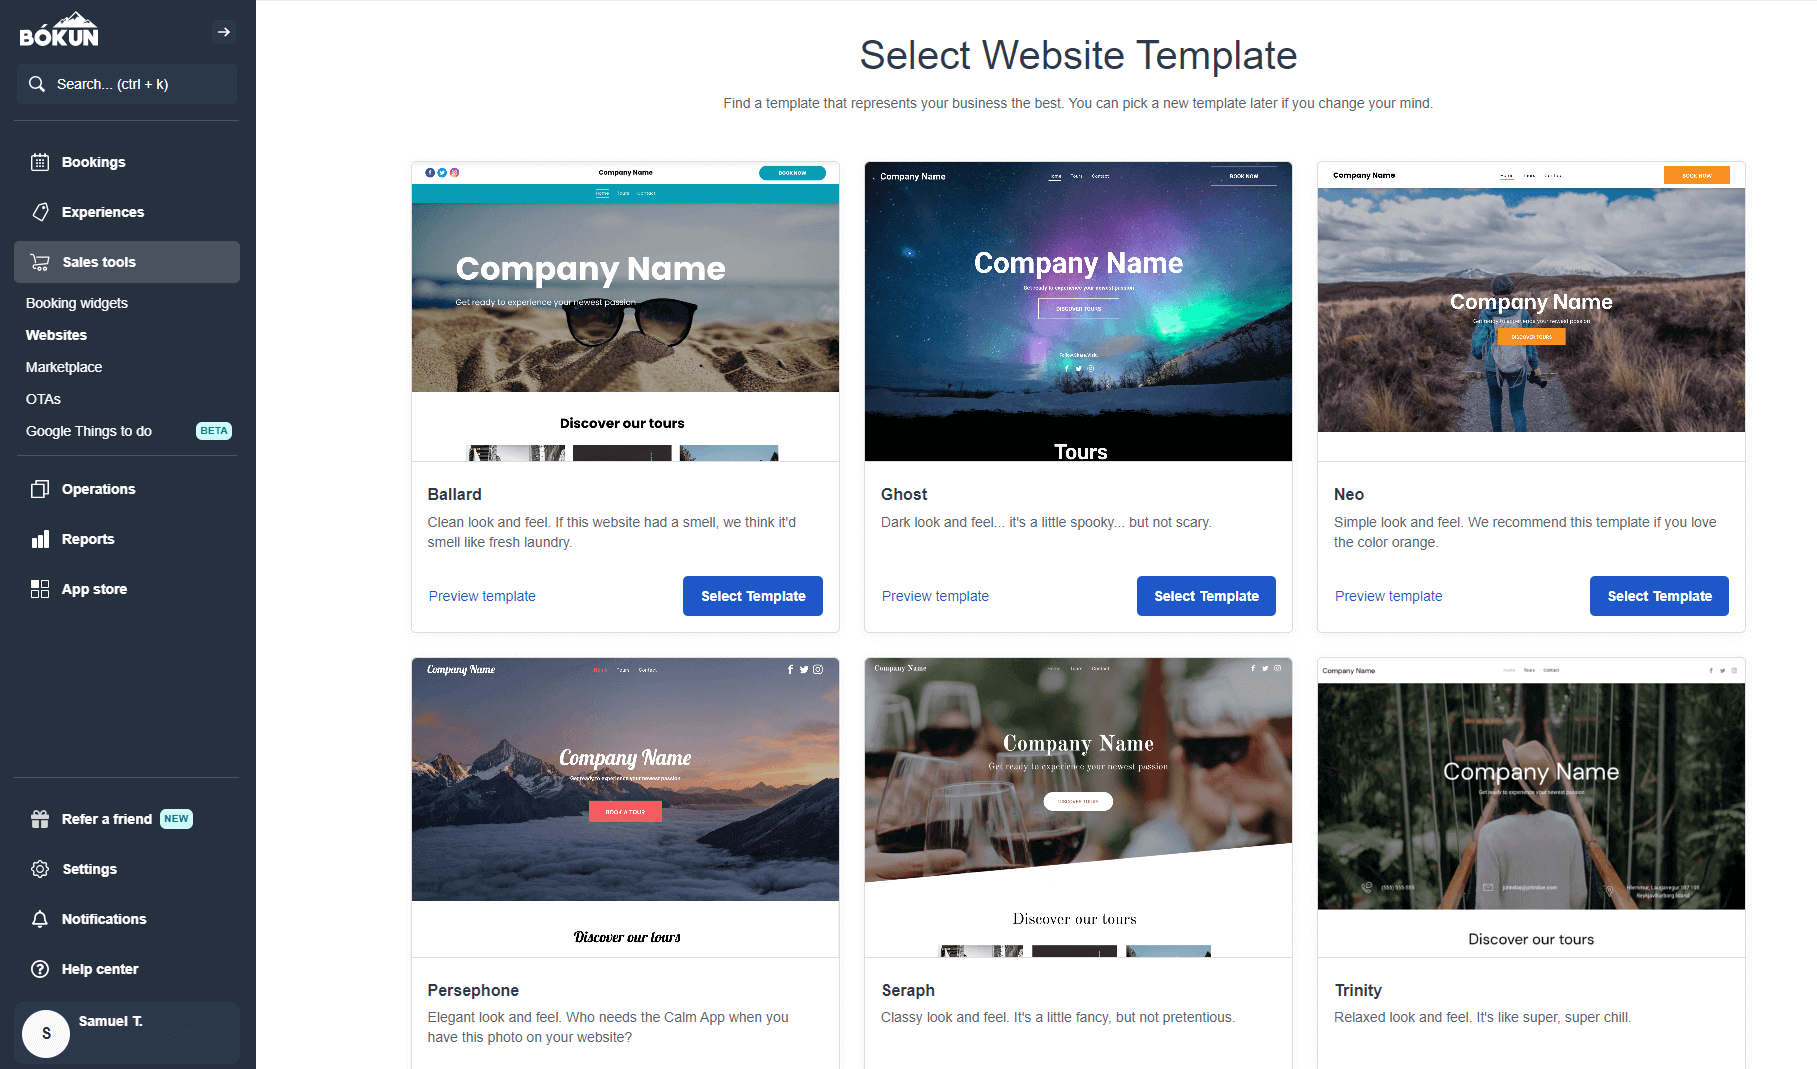 Select Website Template: Find a template that represents your business the best